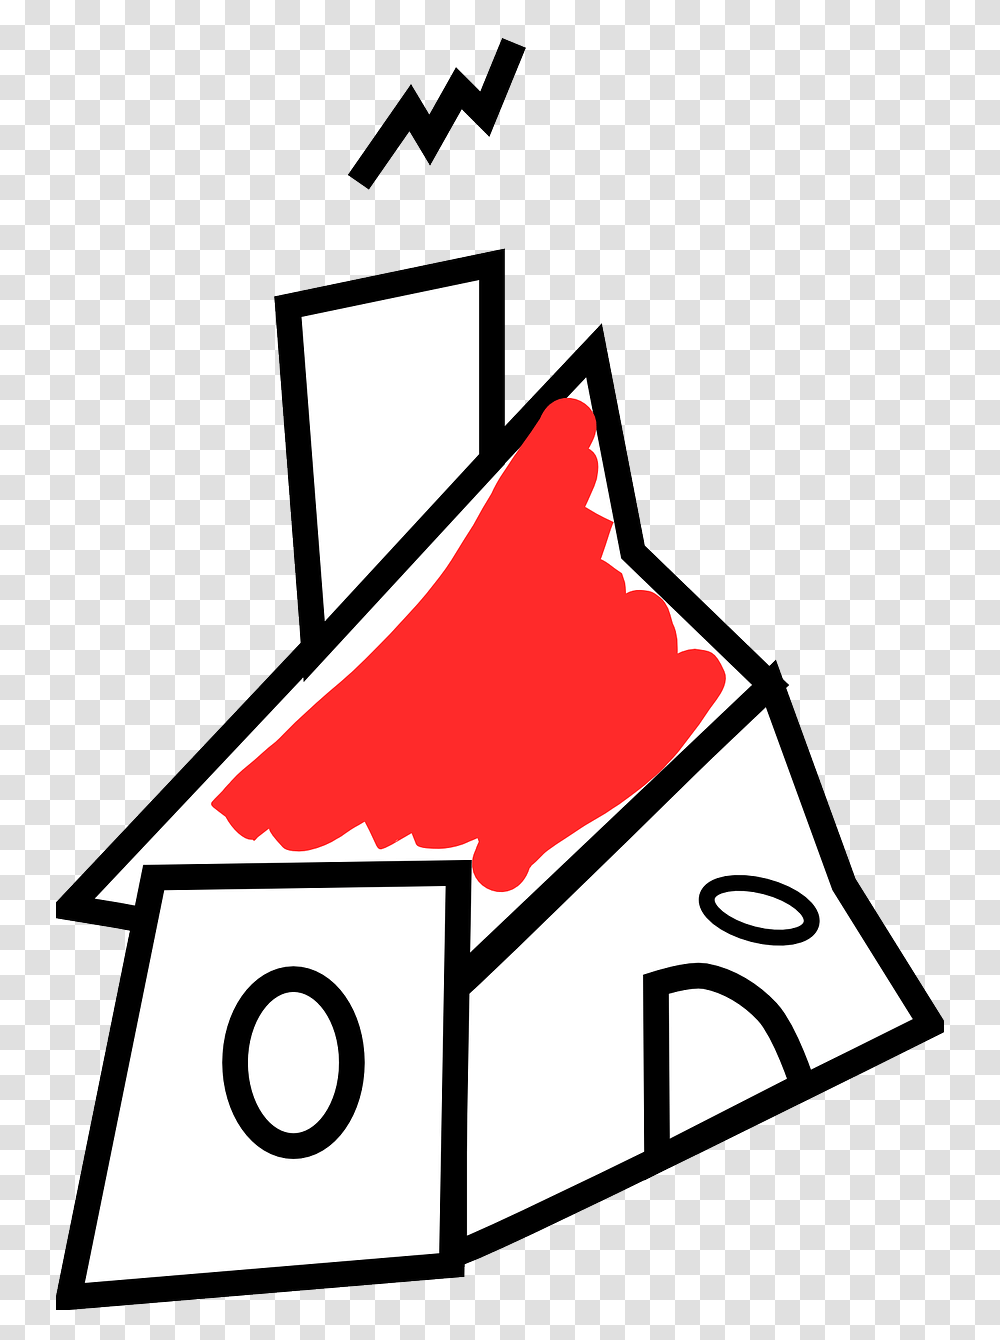 Simple Sketch House, Label, Triangle, Sticker Transparent Png